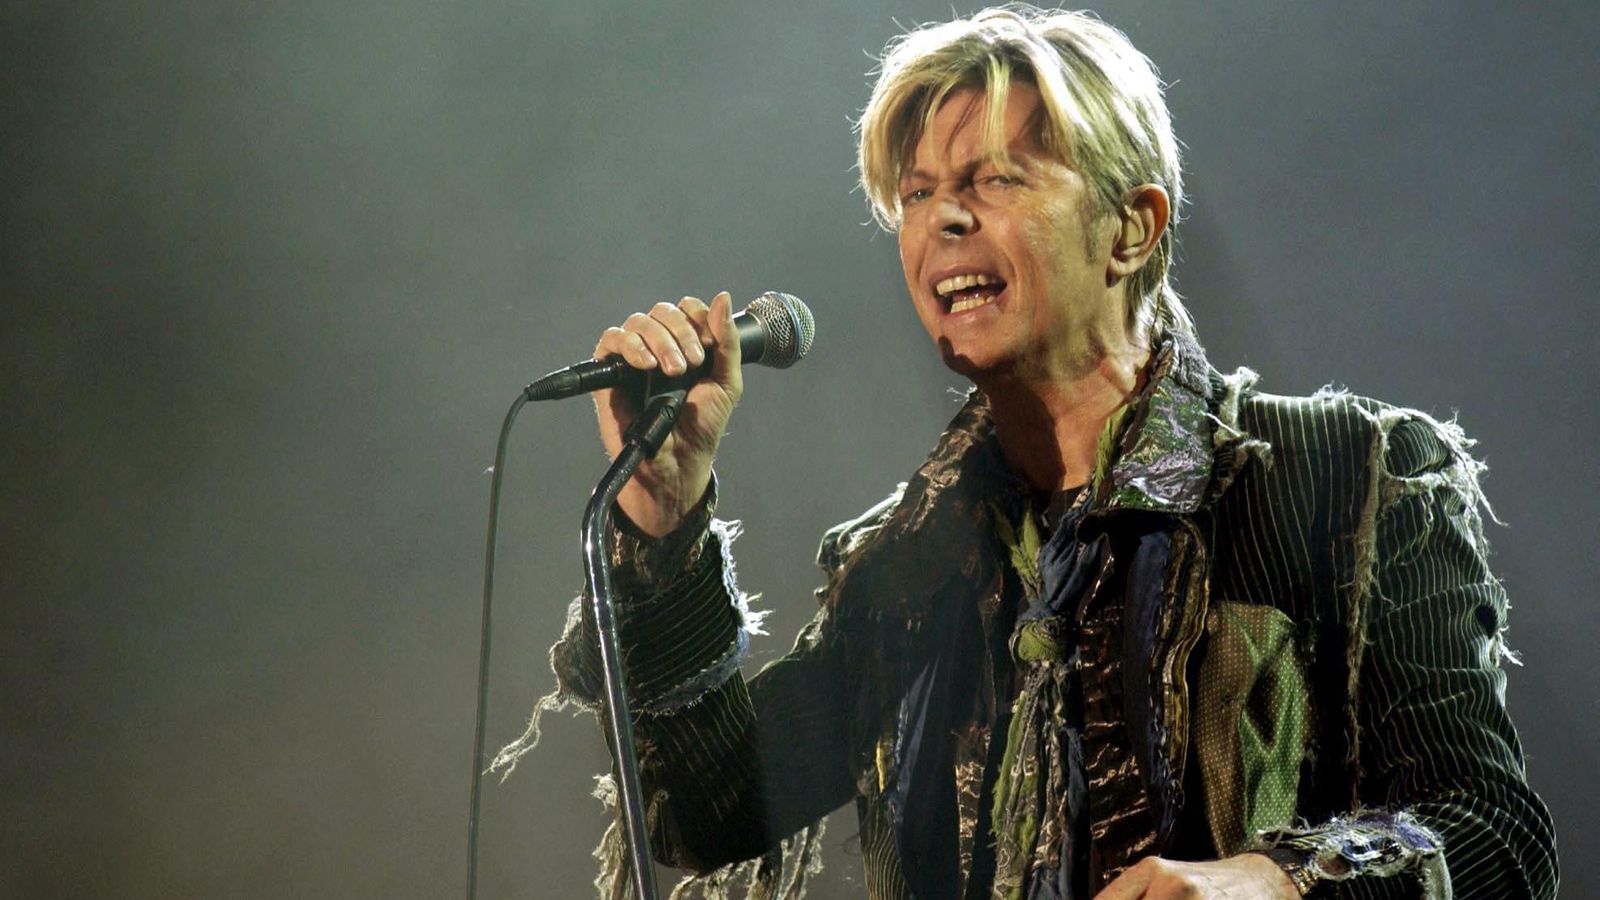 David Bowie's handwritten Starman lyrics sell for over 200,000 at auction